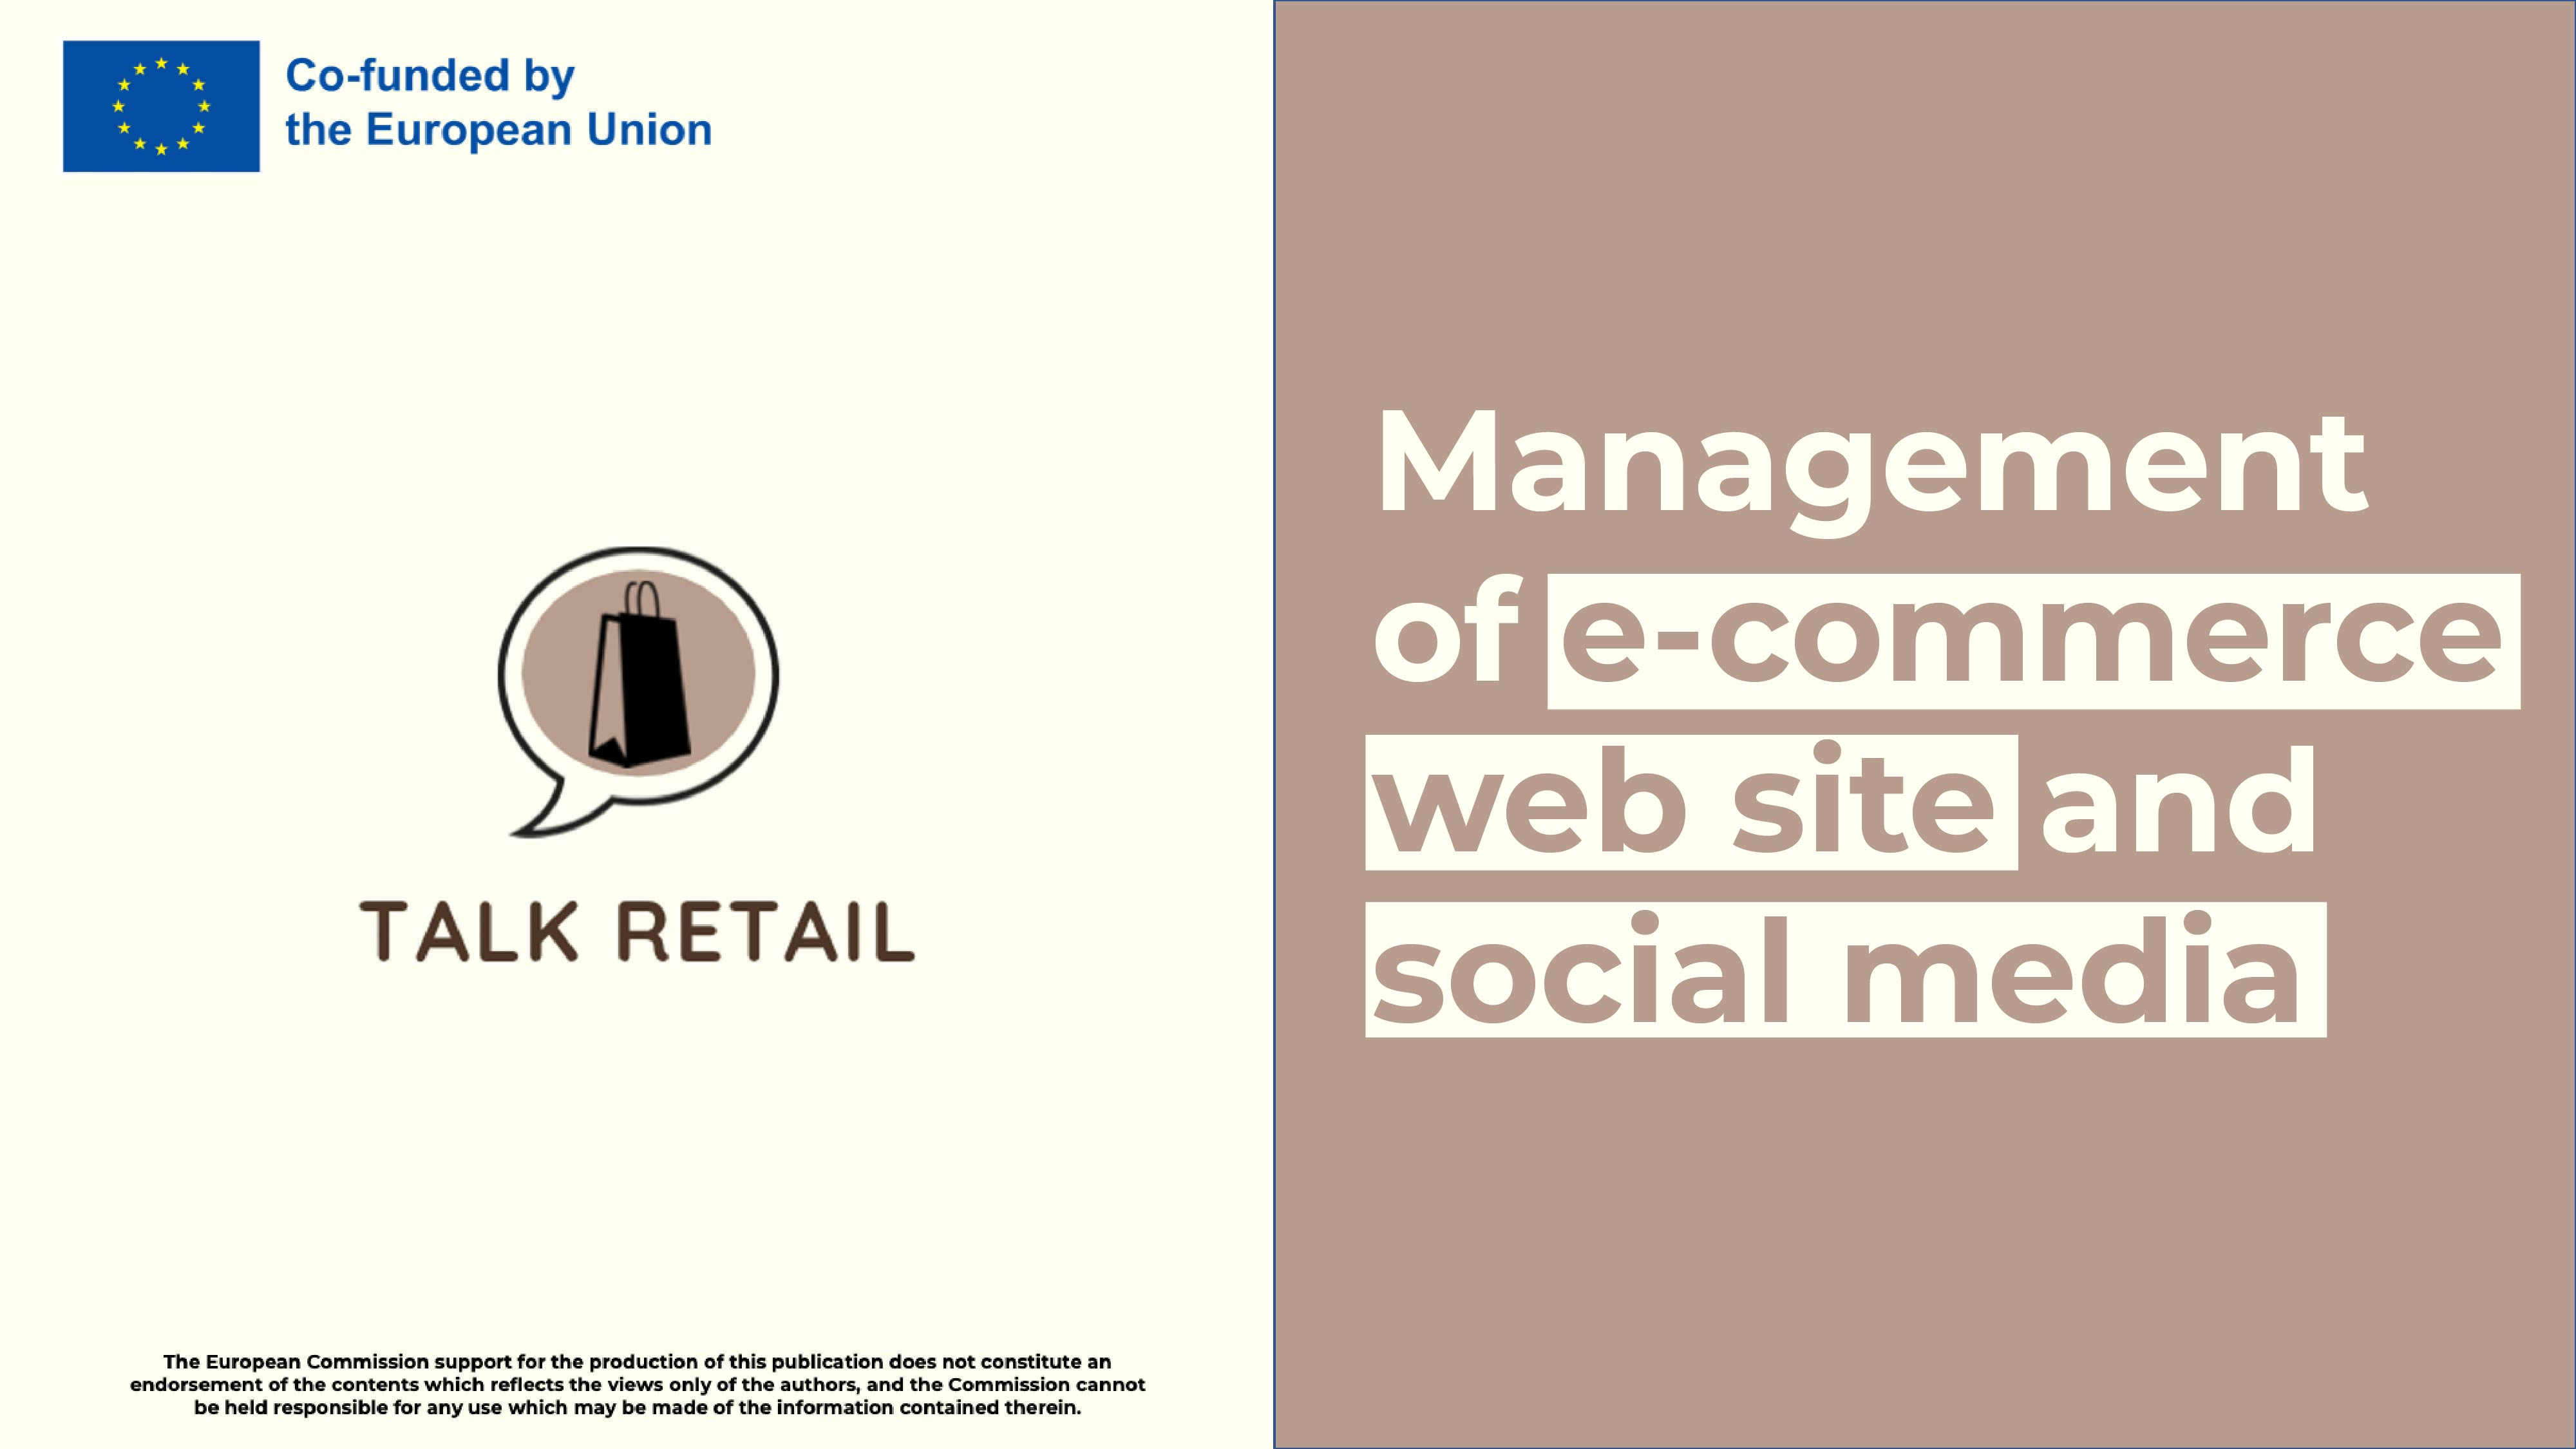 Course 1 - Management of e-commerce web site and social media